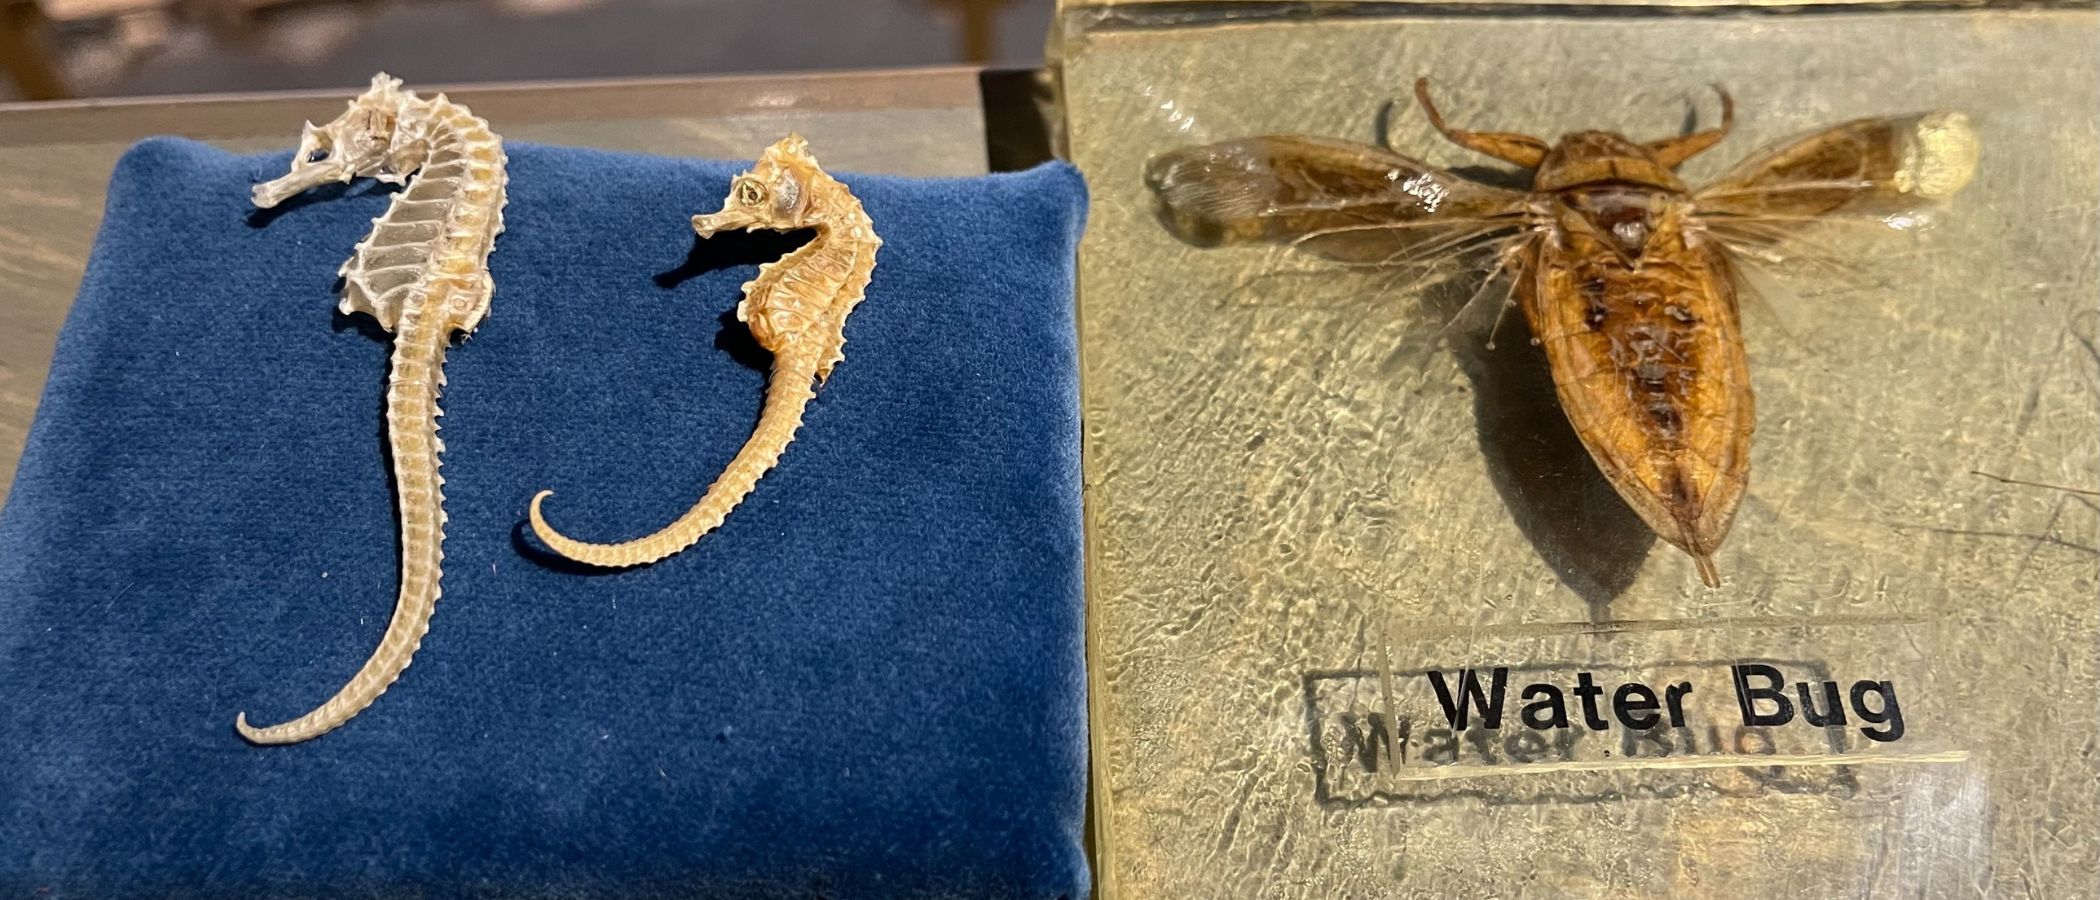 On the left, two sea horse specimens on a blue pillow. On the right, of comparable size to the seahorses, a large bug specimen with an oval, hard-shelled body, wings, and large pincers.